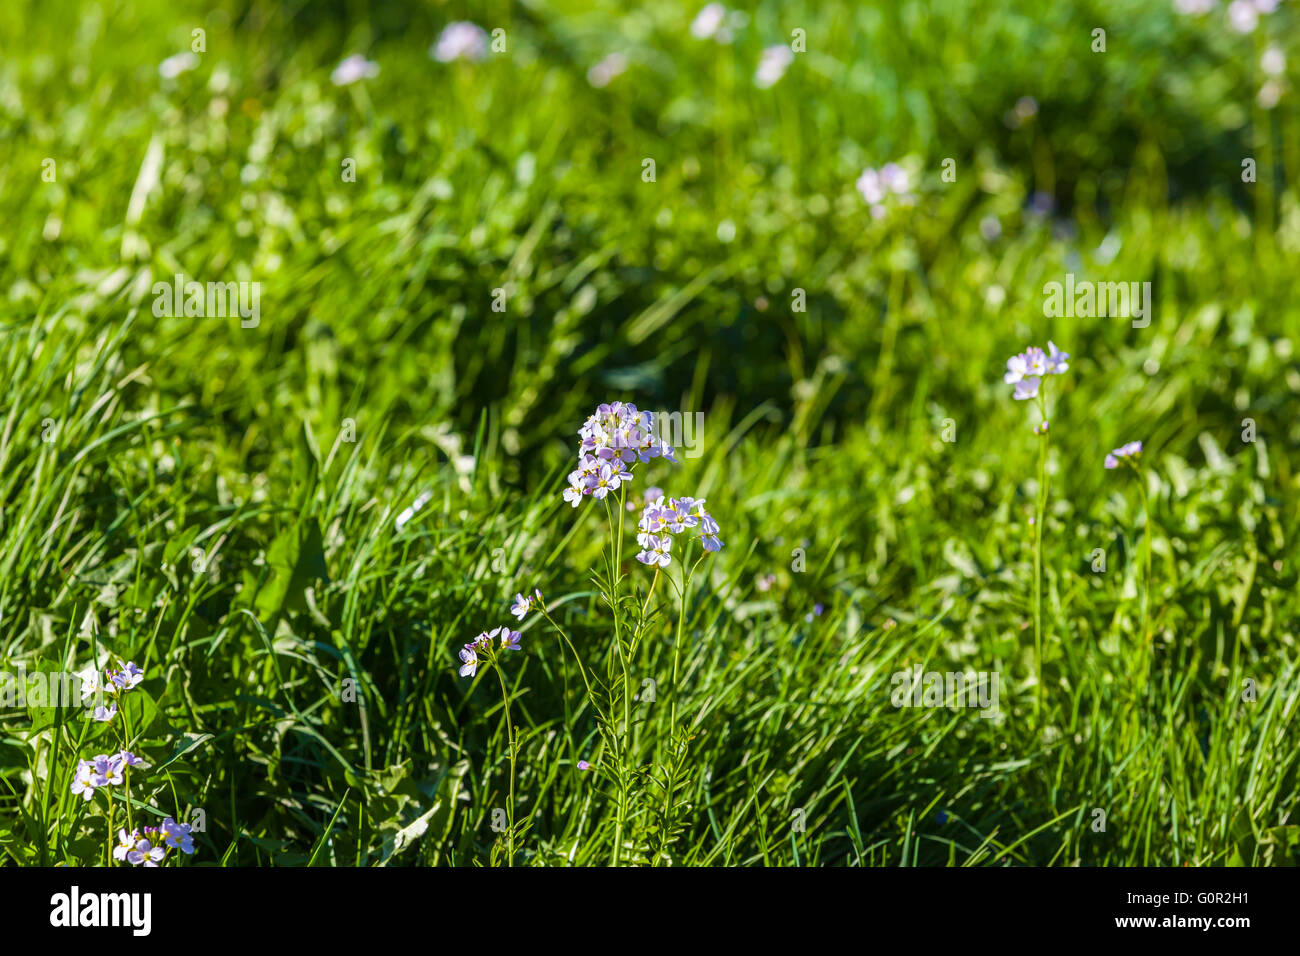 Blue-eyed grasses with green grass in background, copy space available. Stock Photo